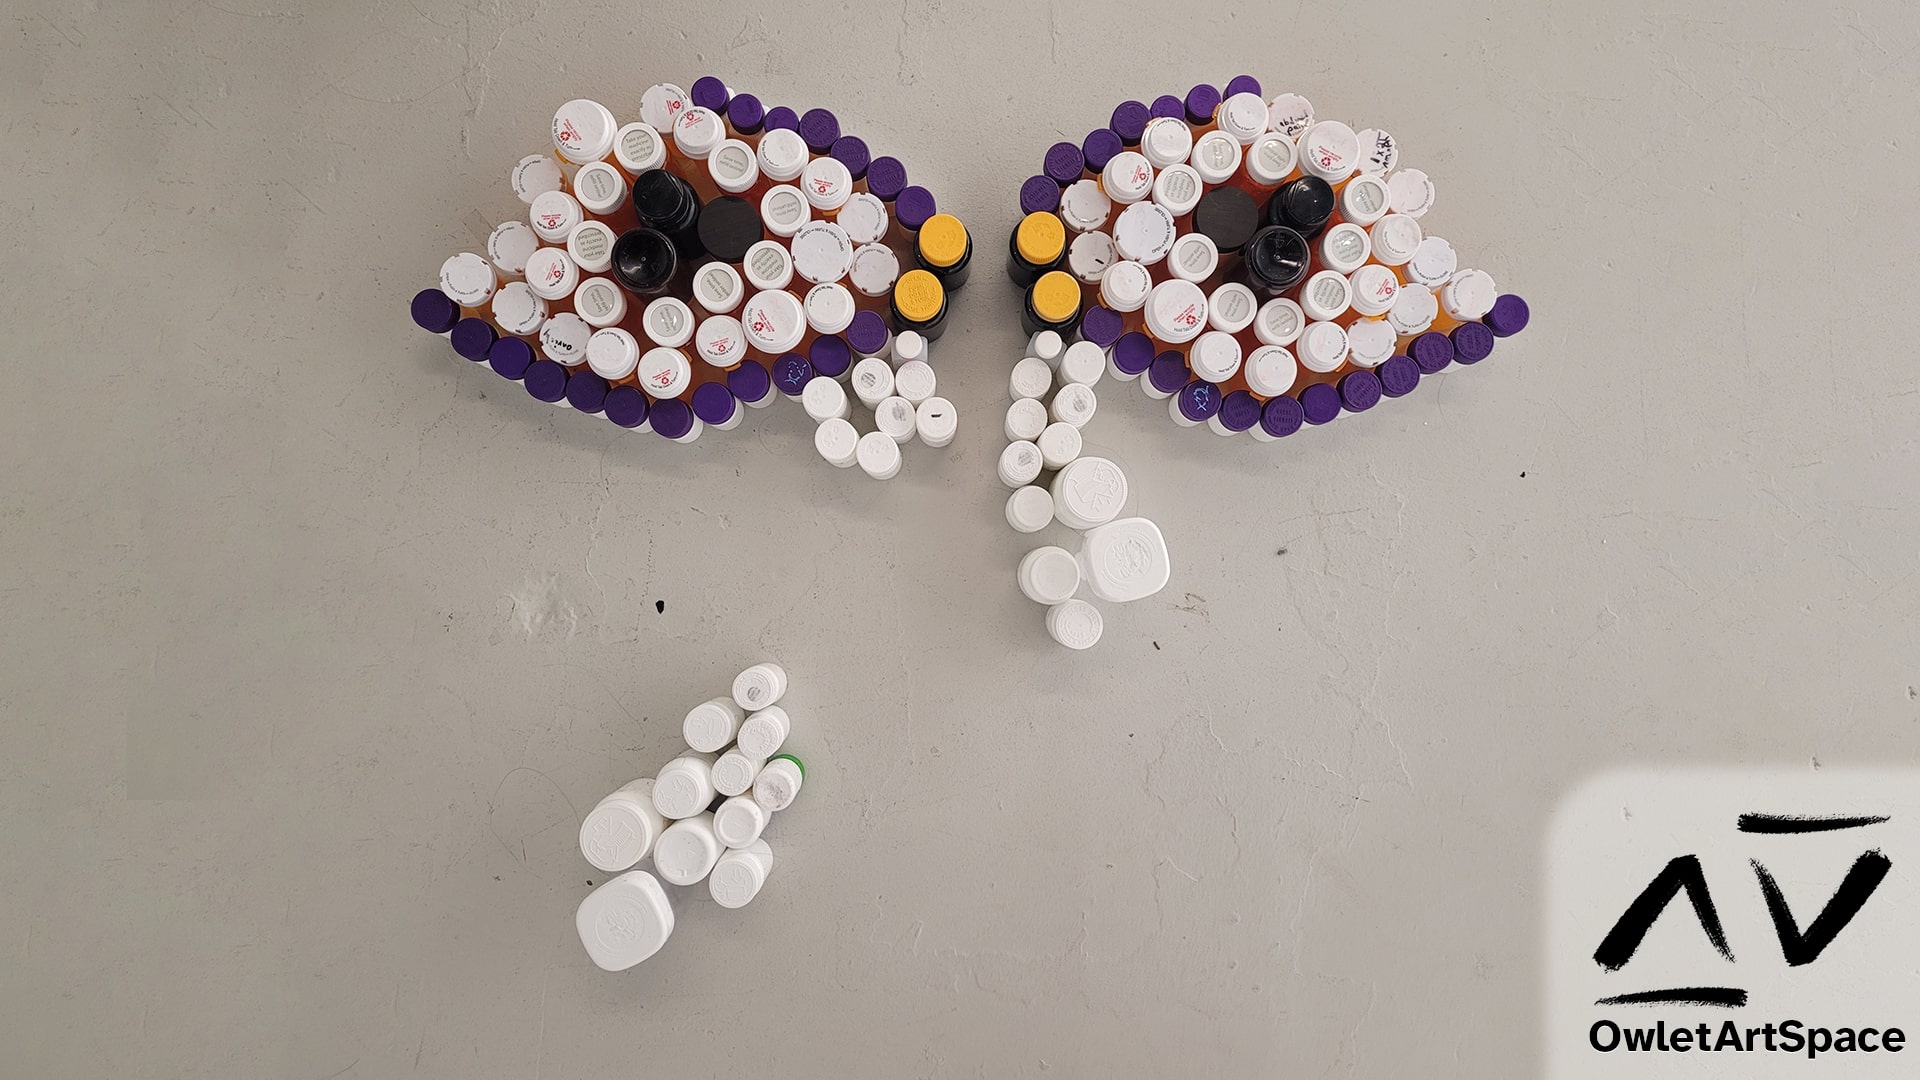 Multiple colors of pill bottles arranged to create a sleep-deprived crying set of eyes. It has black pupils, a white and orange sclera, yellow tear ducts, and white tears dripping down.